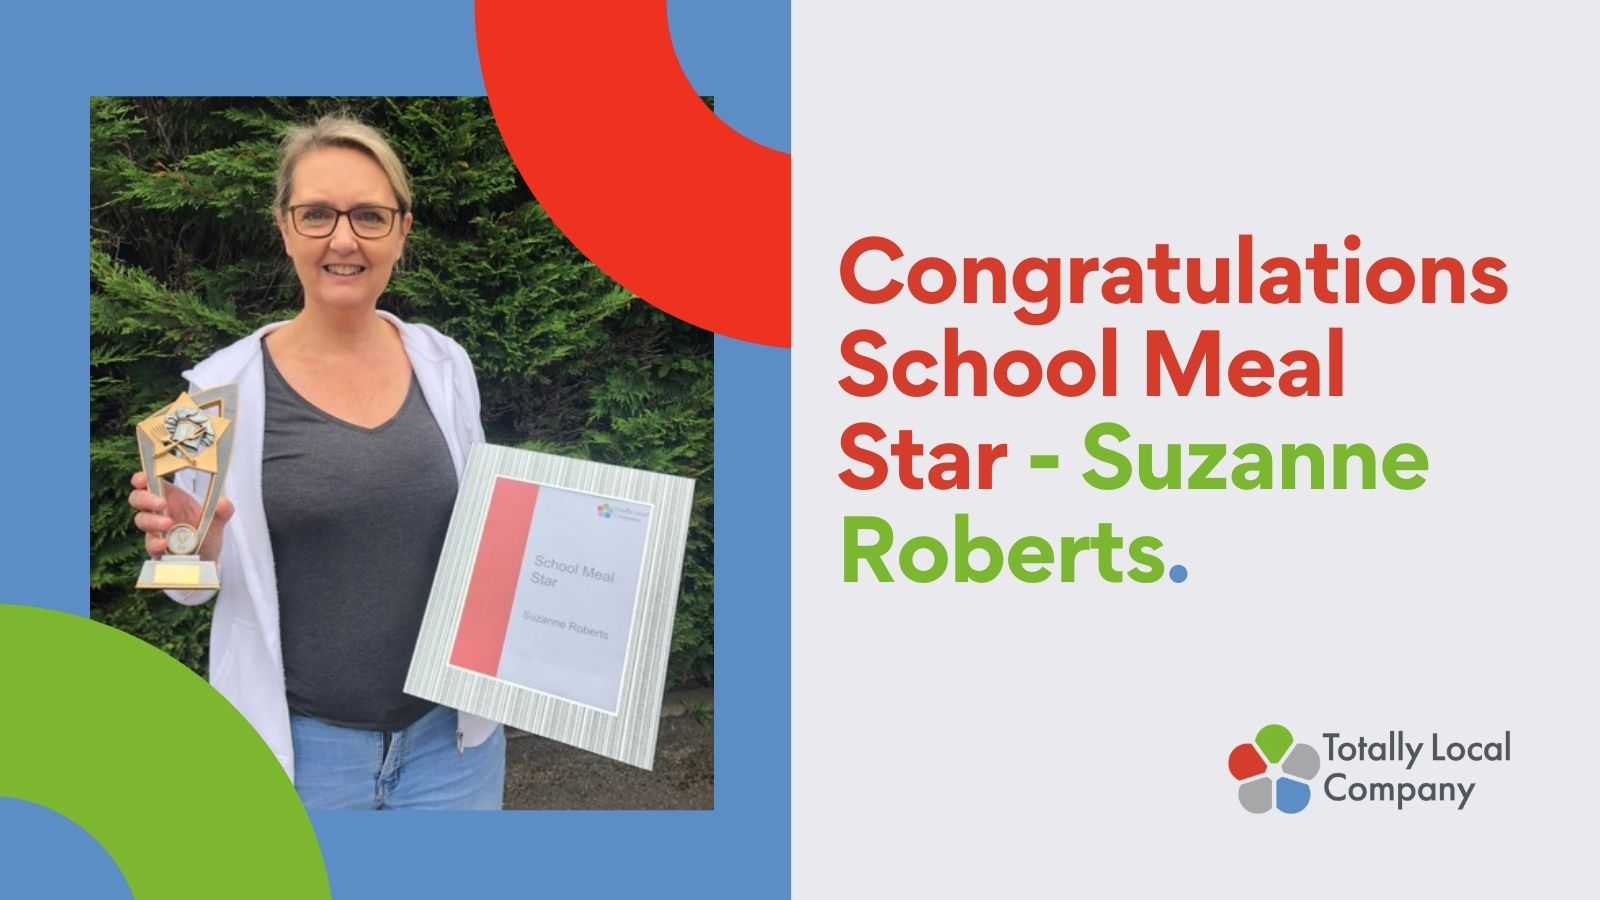 wording congratulations school meals star - Suzanne Roberts, image of Suzanne holding her certificate and award.